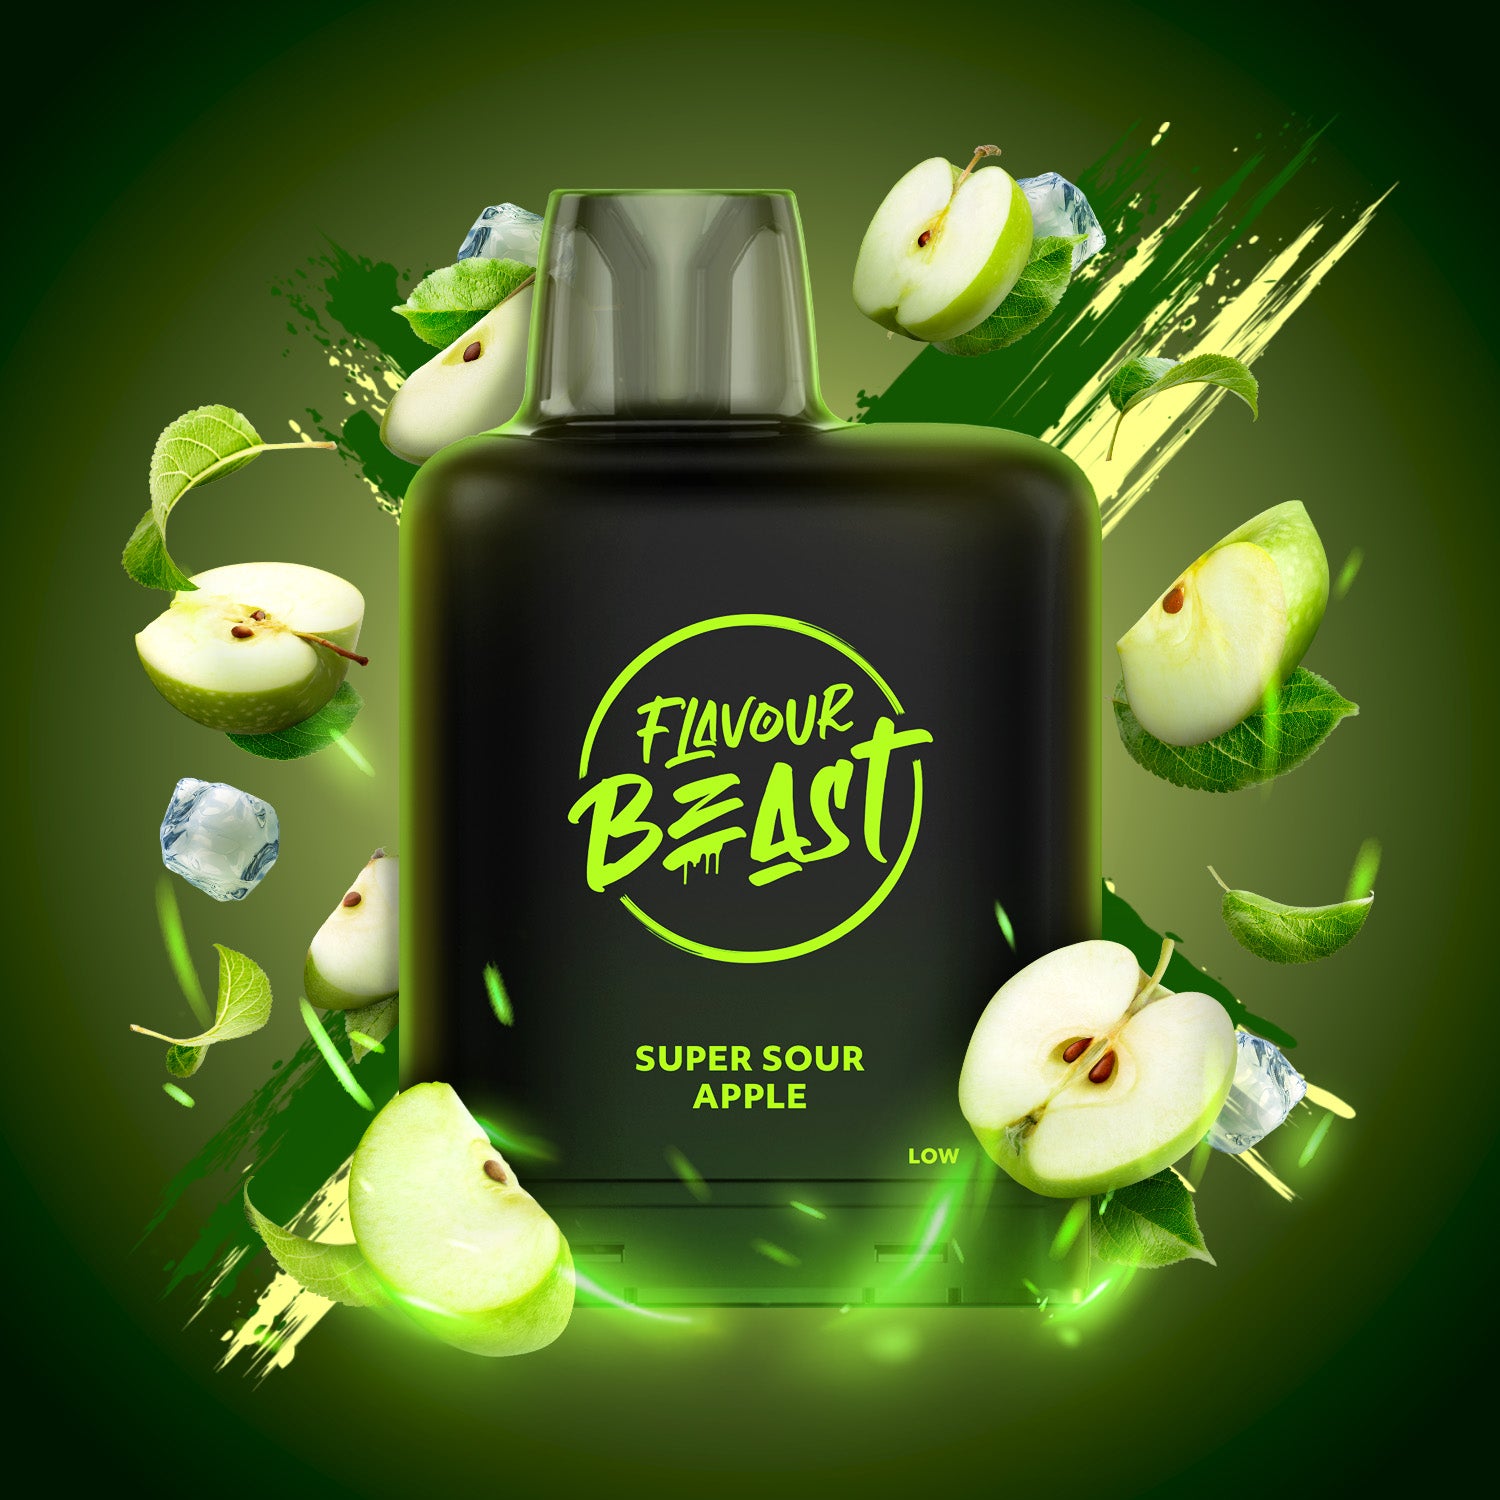 LEVEL X BOOST FLAVOUR BEAST Super Sour Apple 20MG